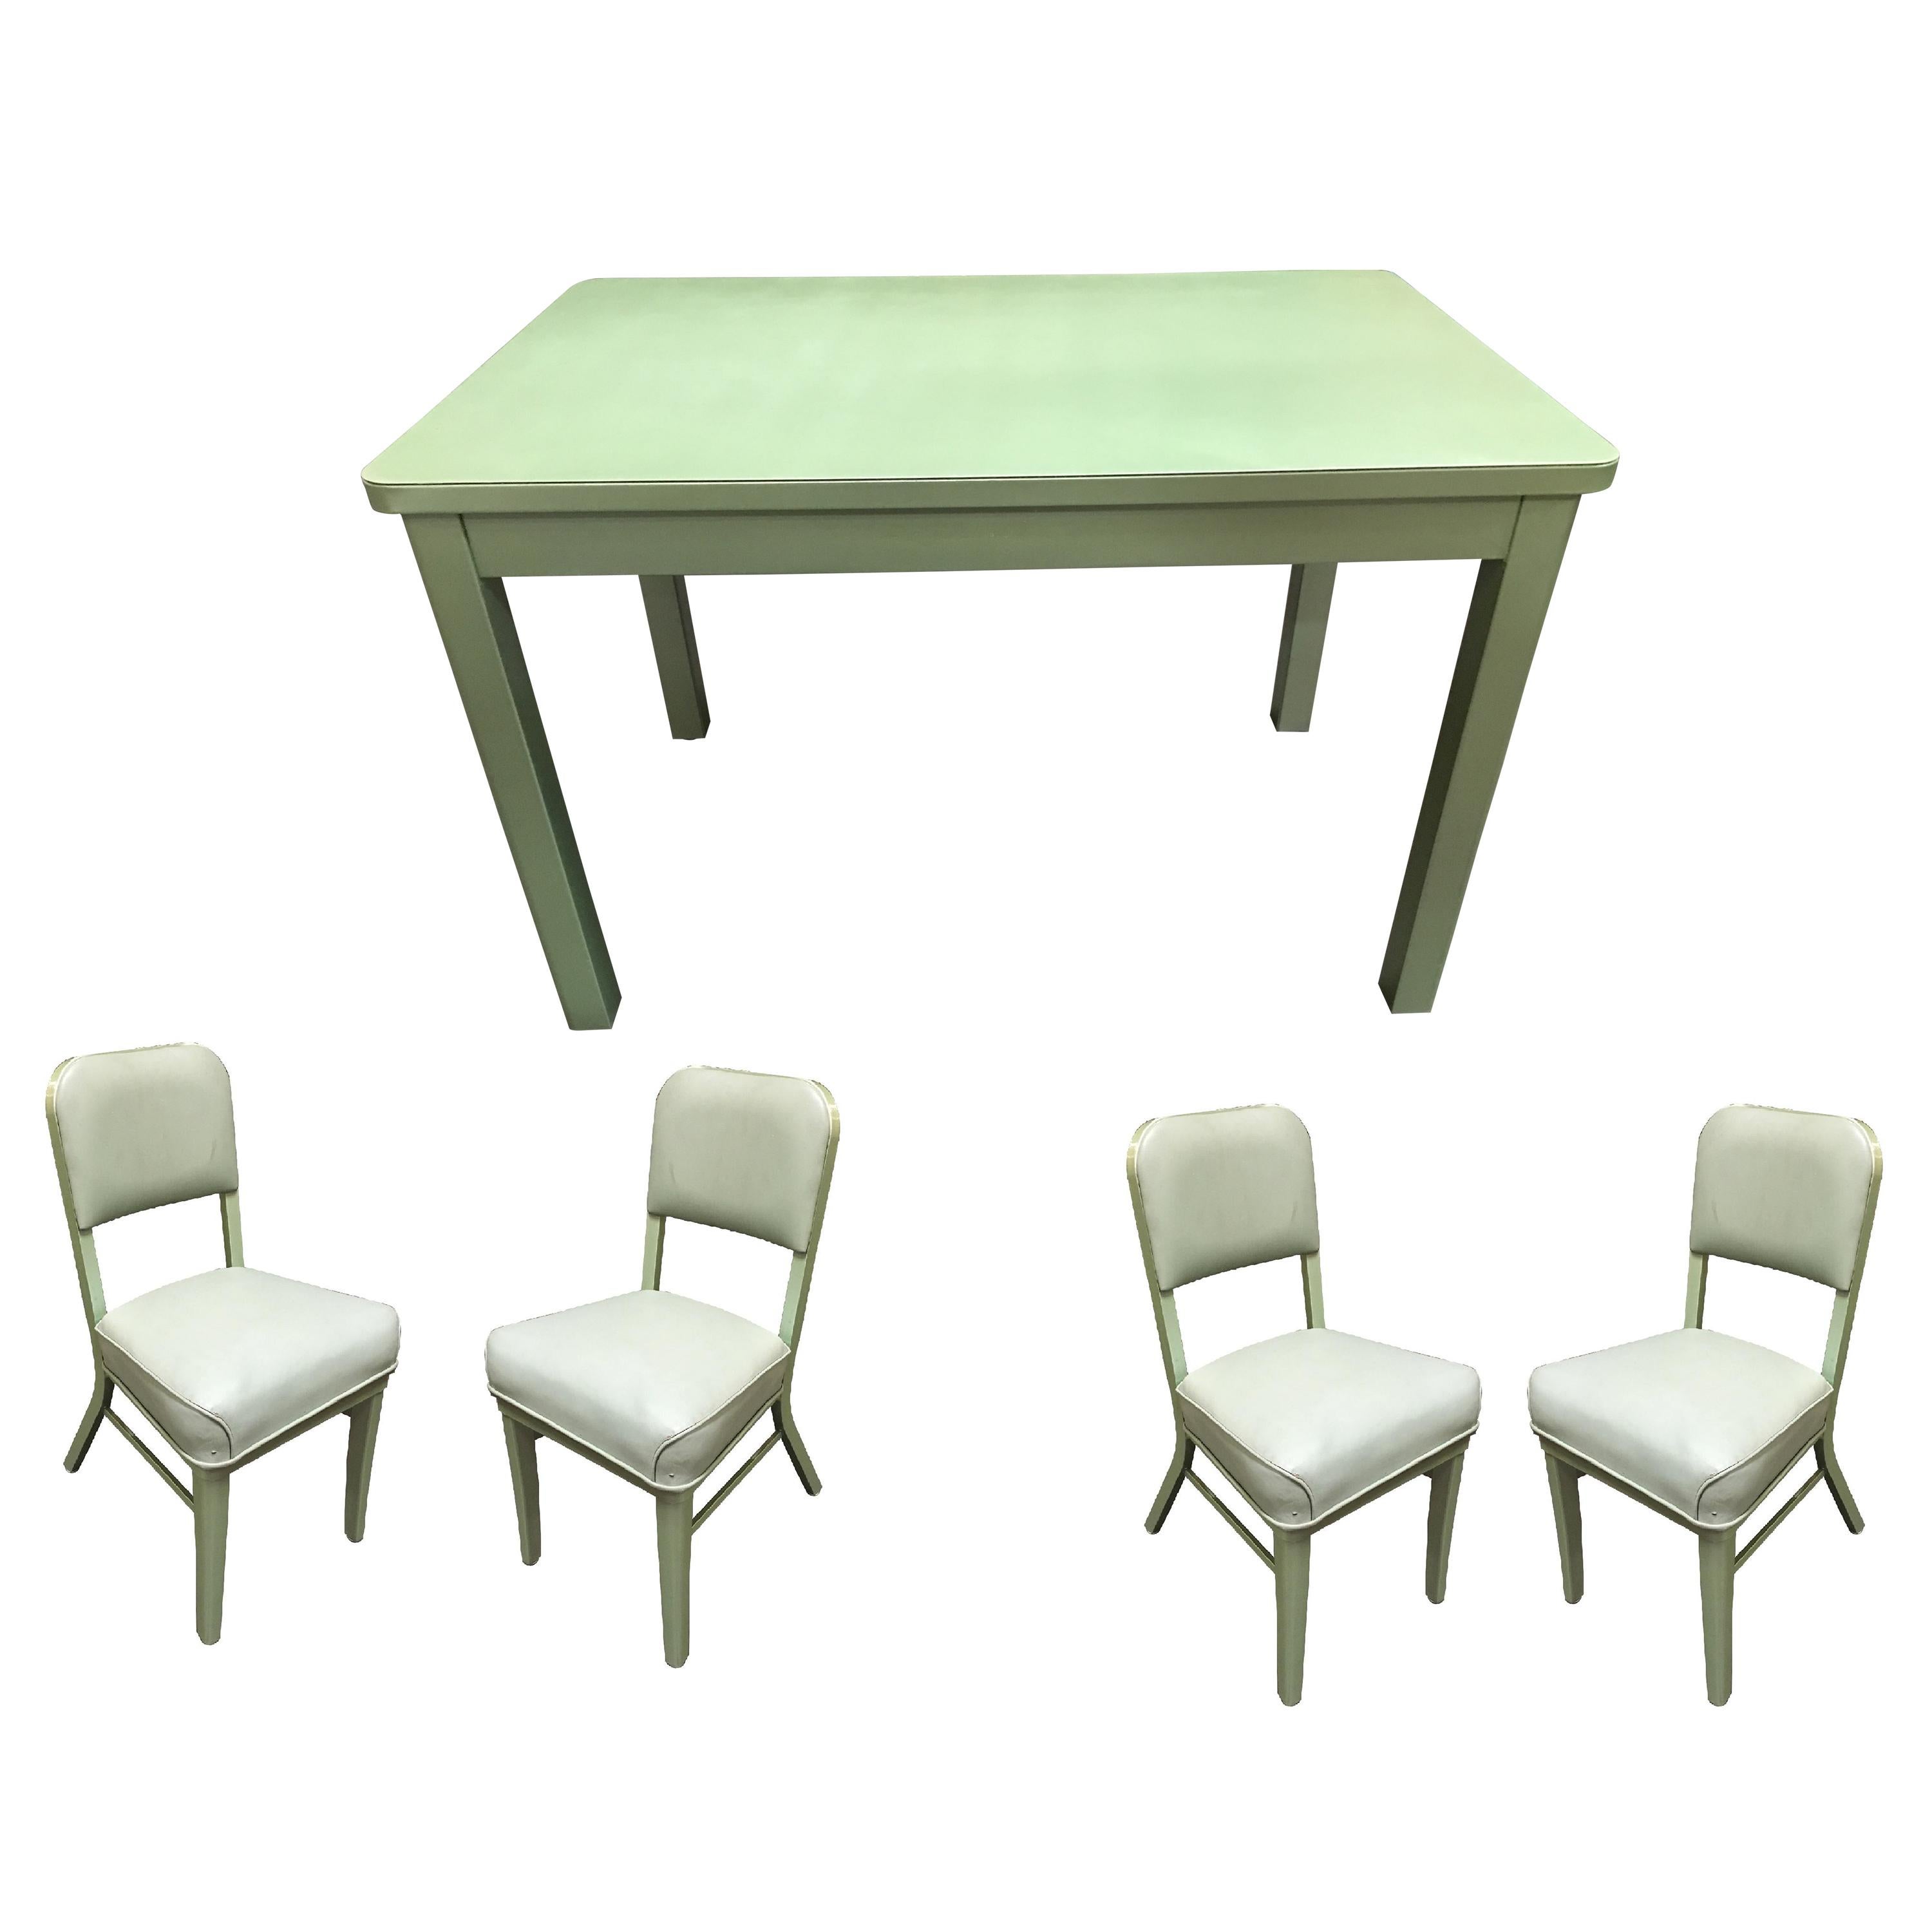 Midcentury Steelcase Tanker Dining Table and Chairs Set